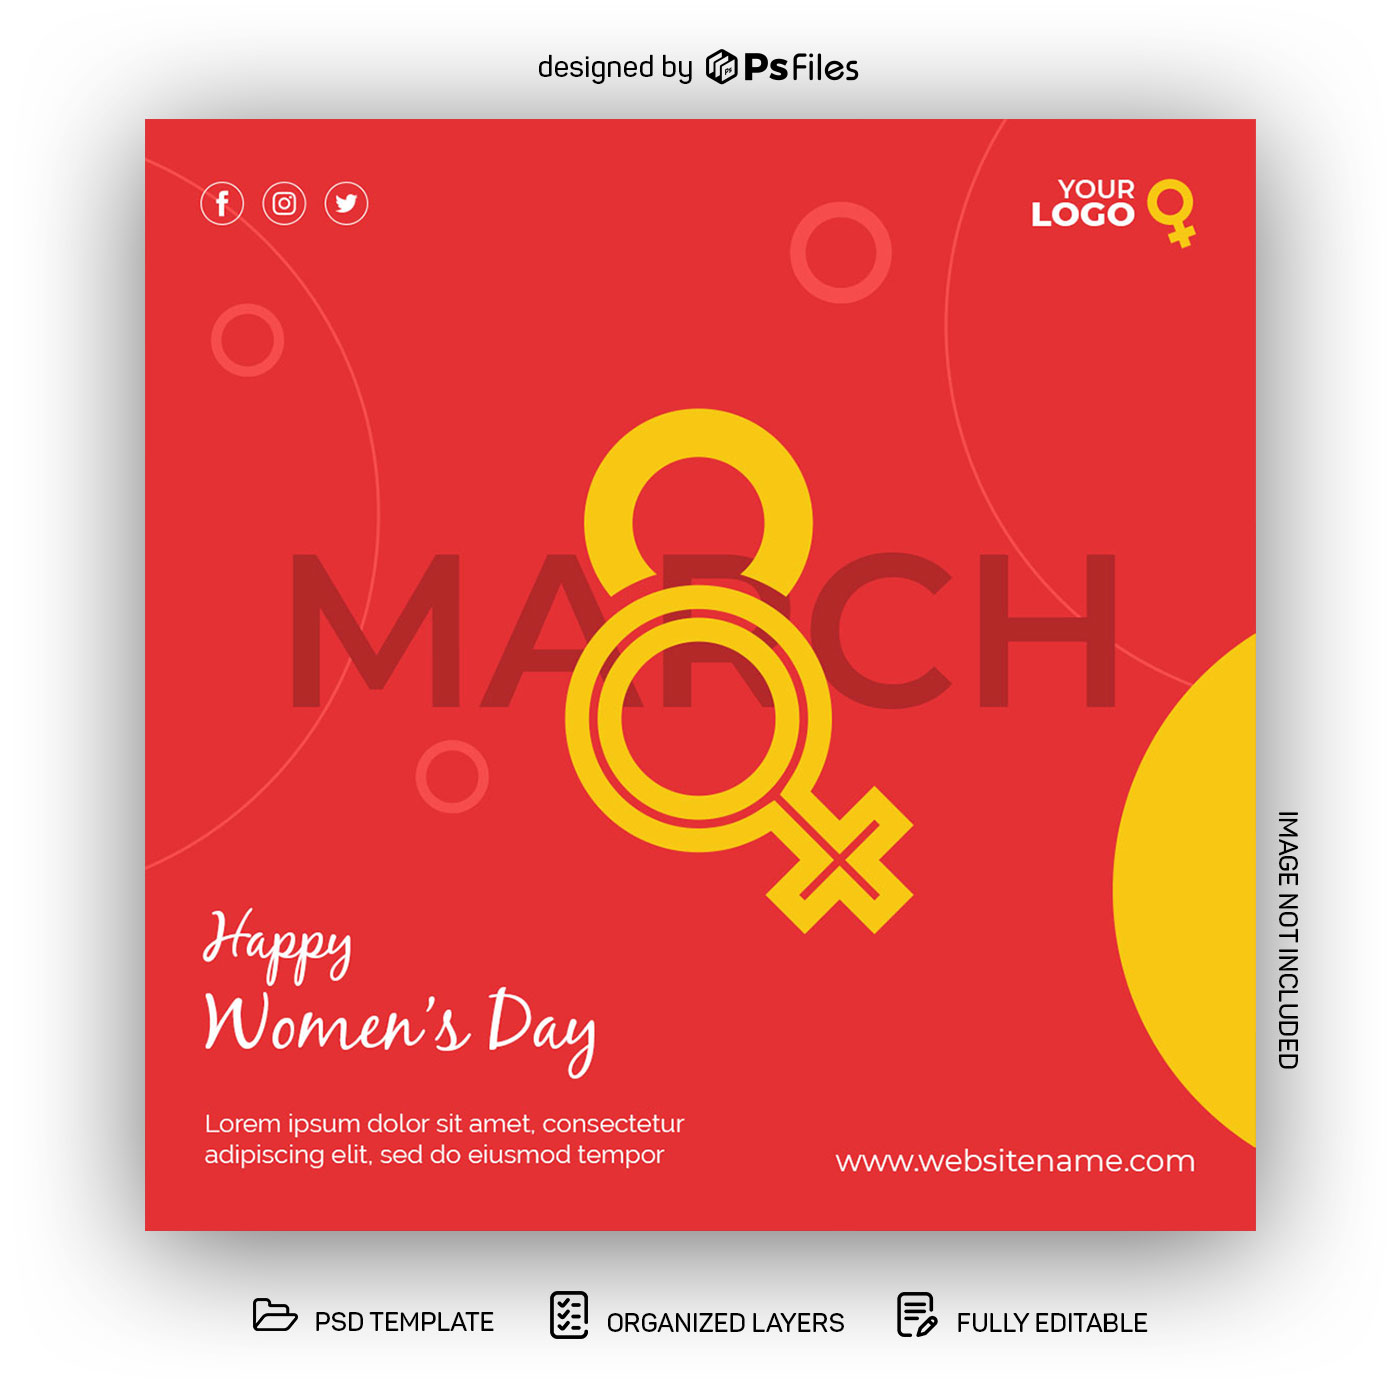 Free Women's Day 2022 Post Banner Design PSD Template